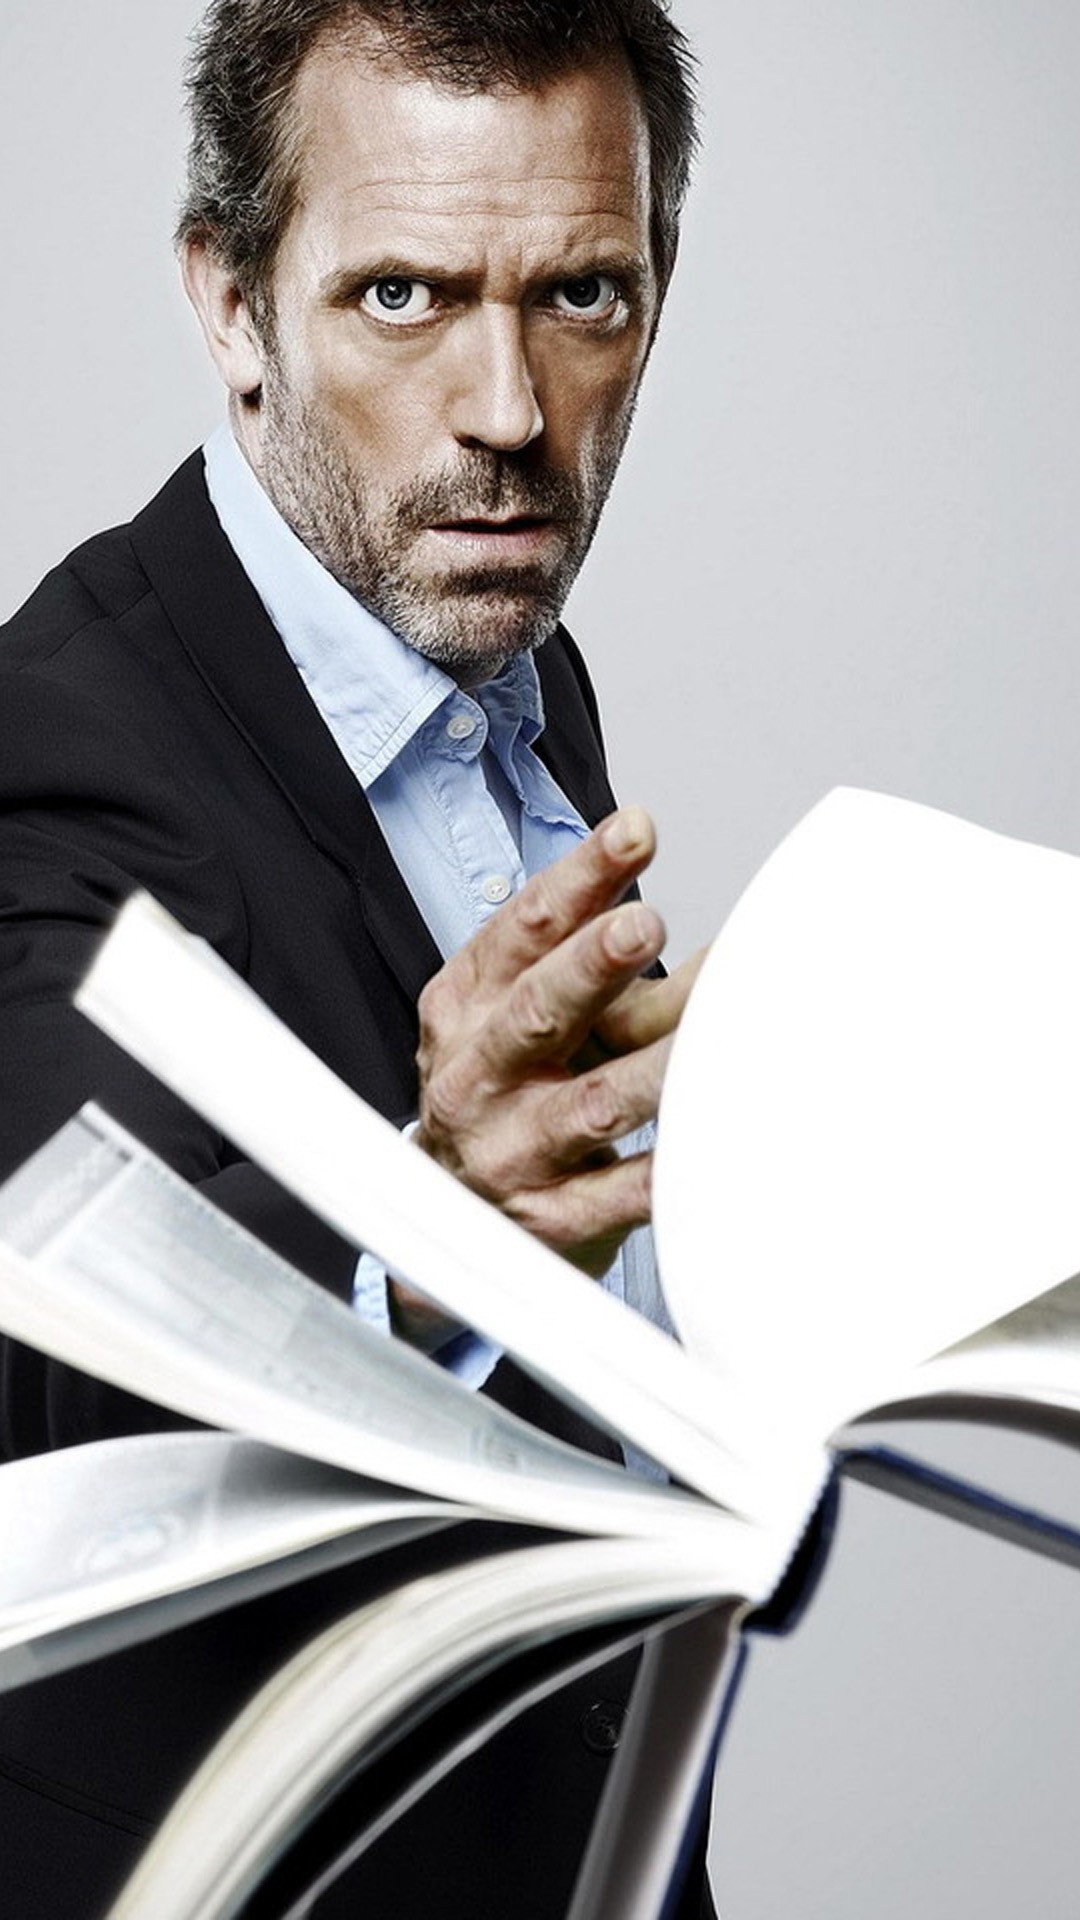 Download - Dr House Wallpaper Iphone , HD Wallpaper & Backgrounds